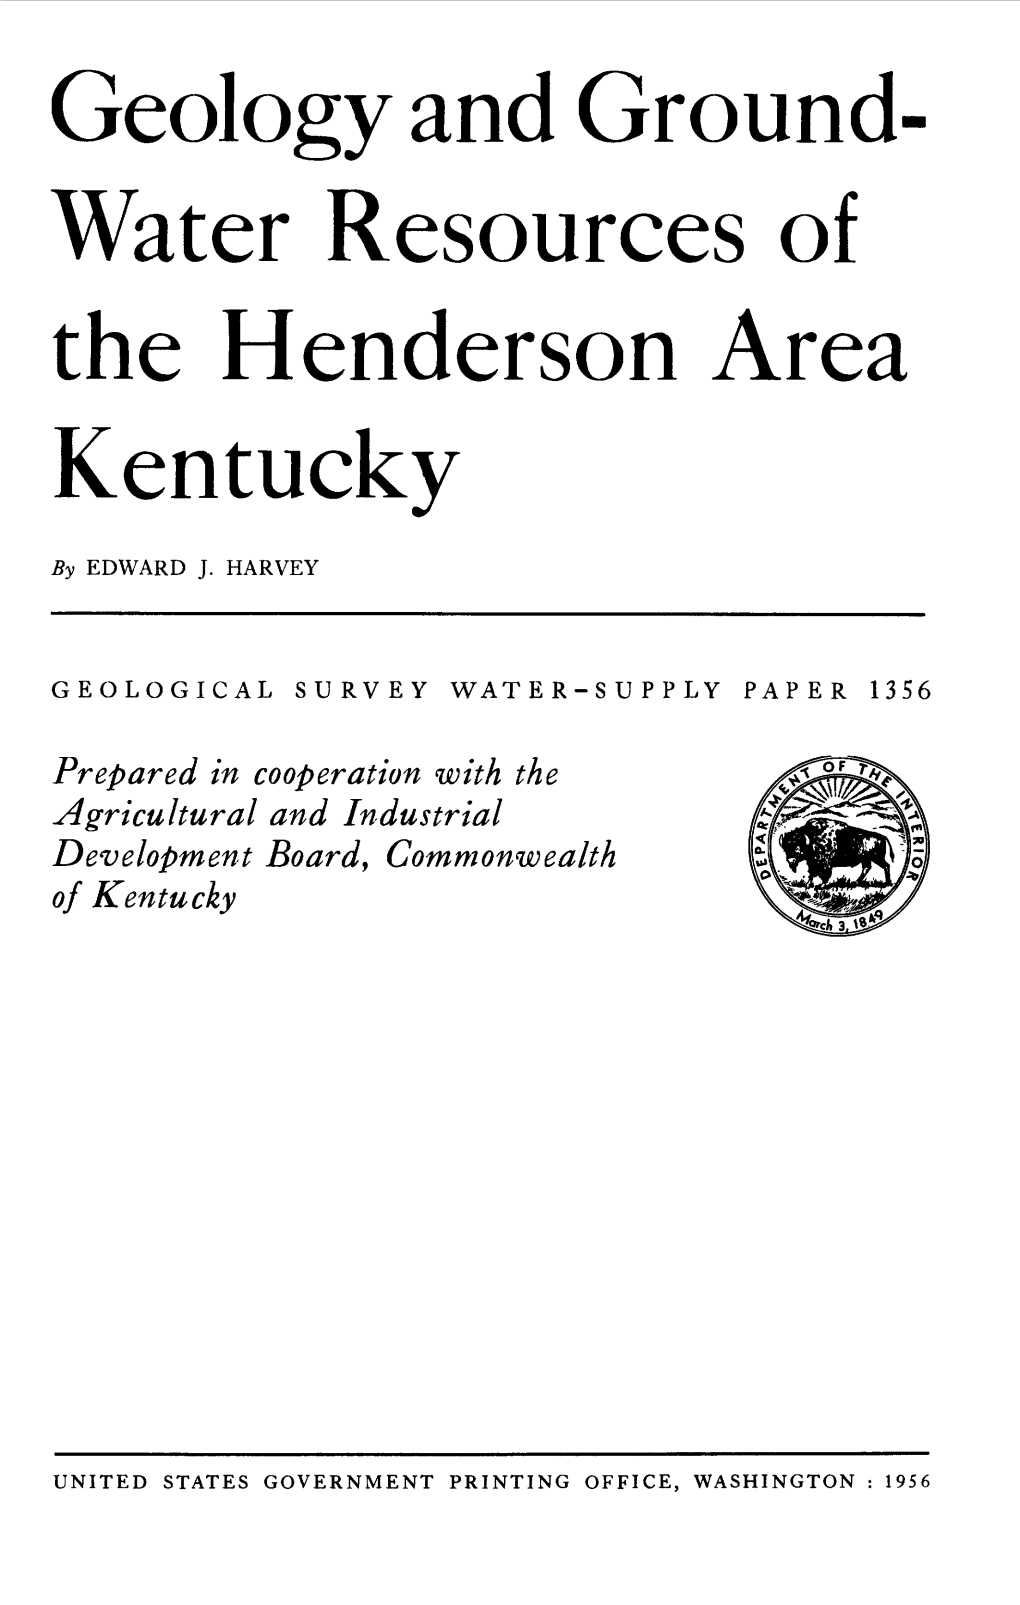 Geology and Ground- Water Resources of the Henderson Area Kentucky